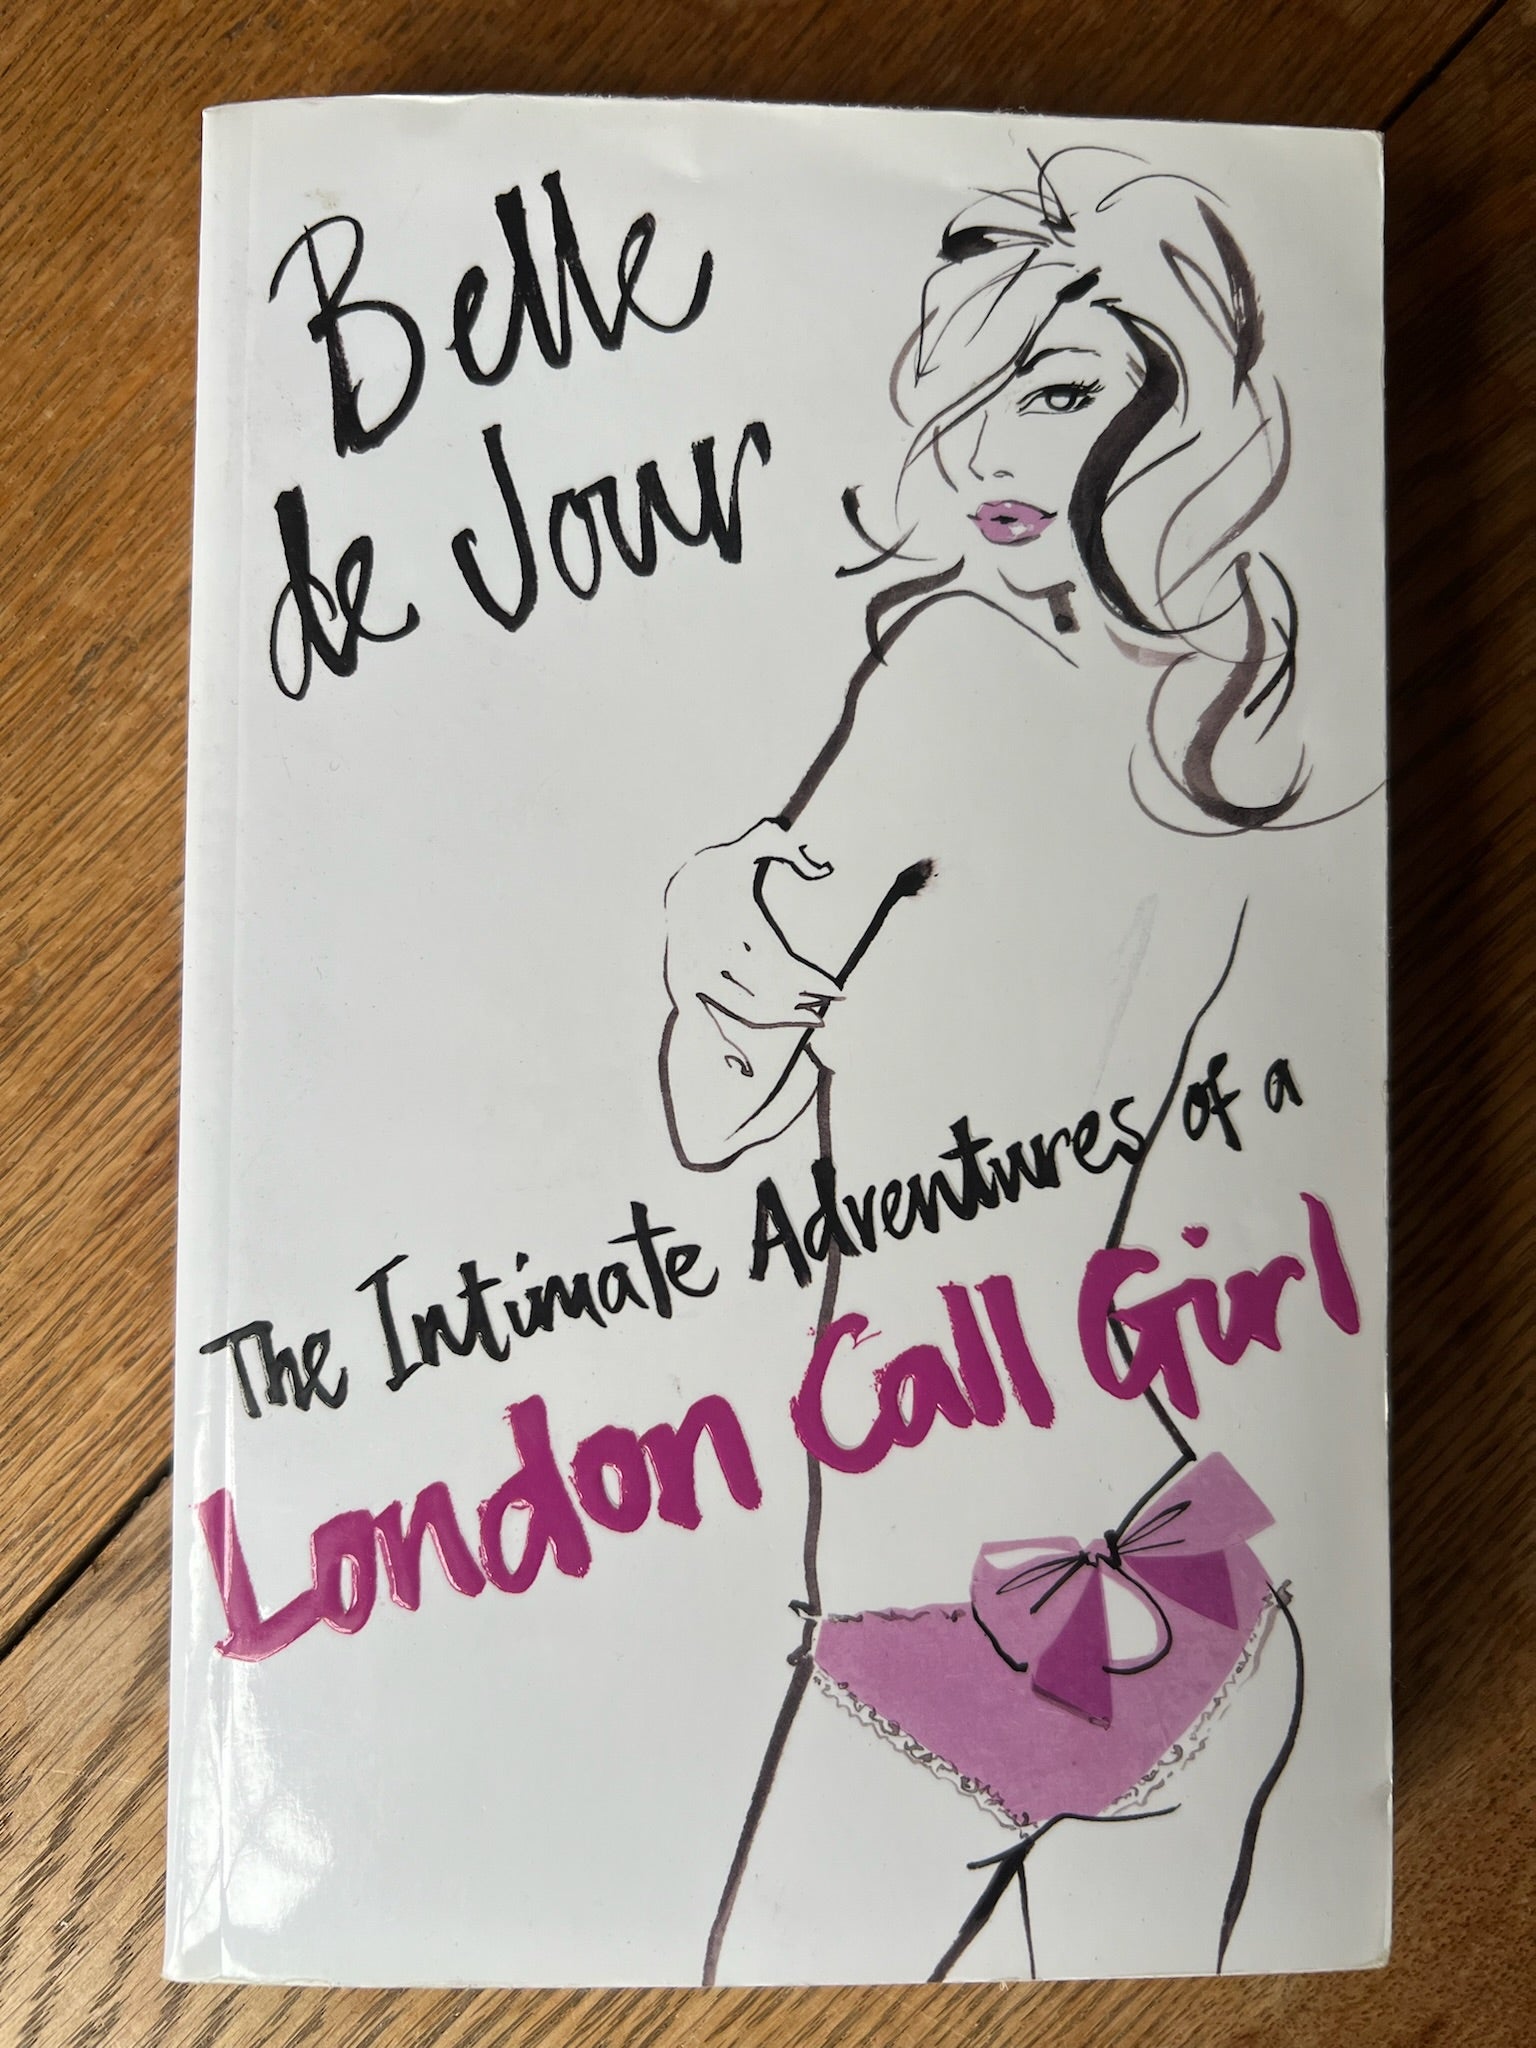 ‘THE INTIMATE ADVENTURES OF A LONDON CALL GIRL’ Belle De Jour